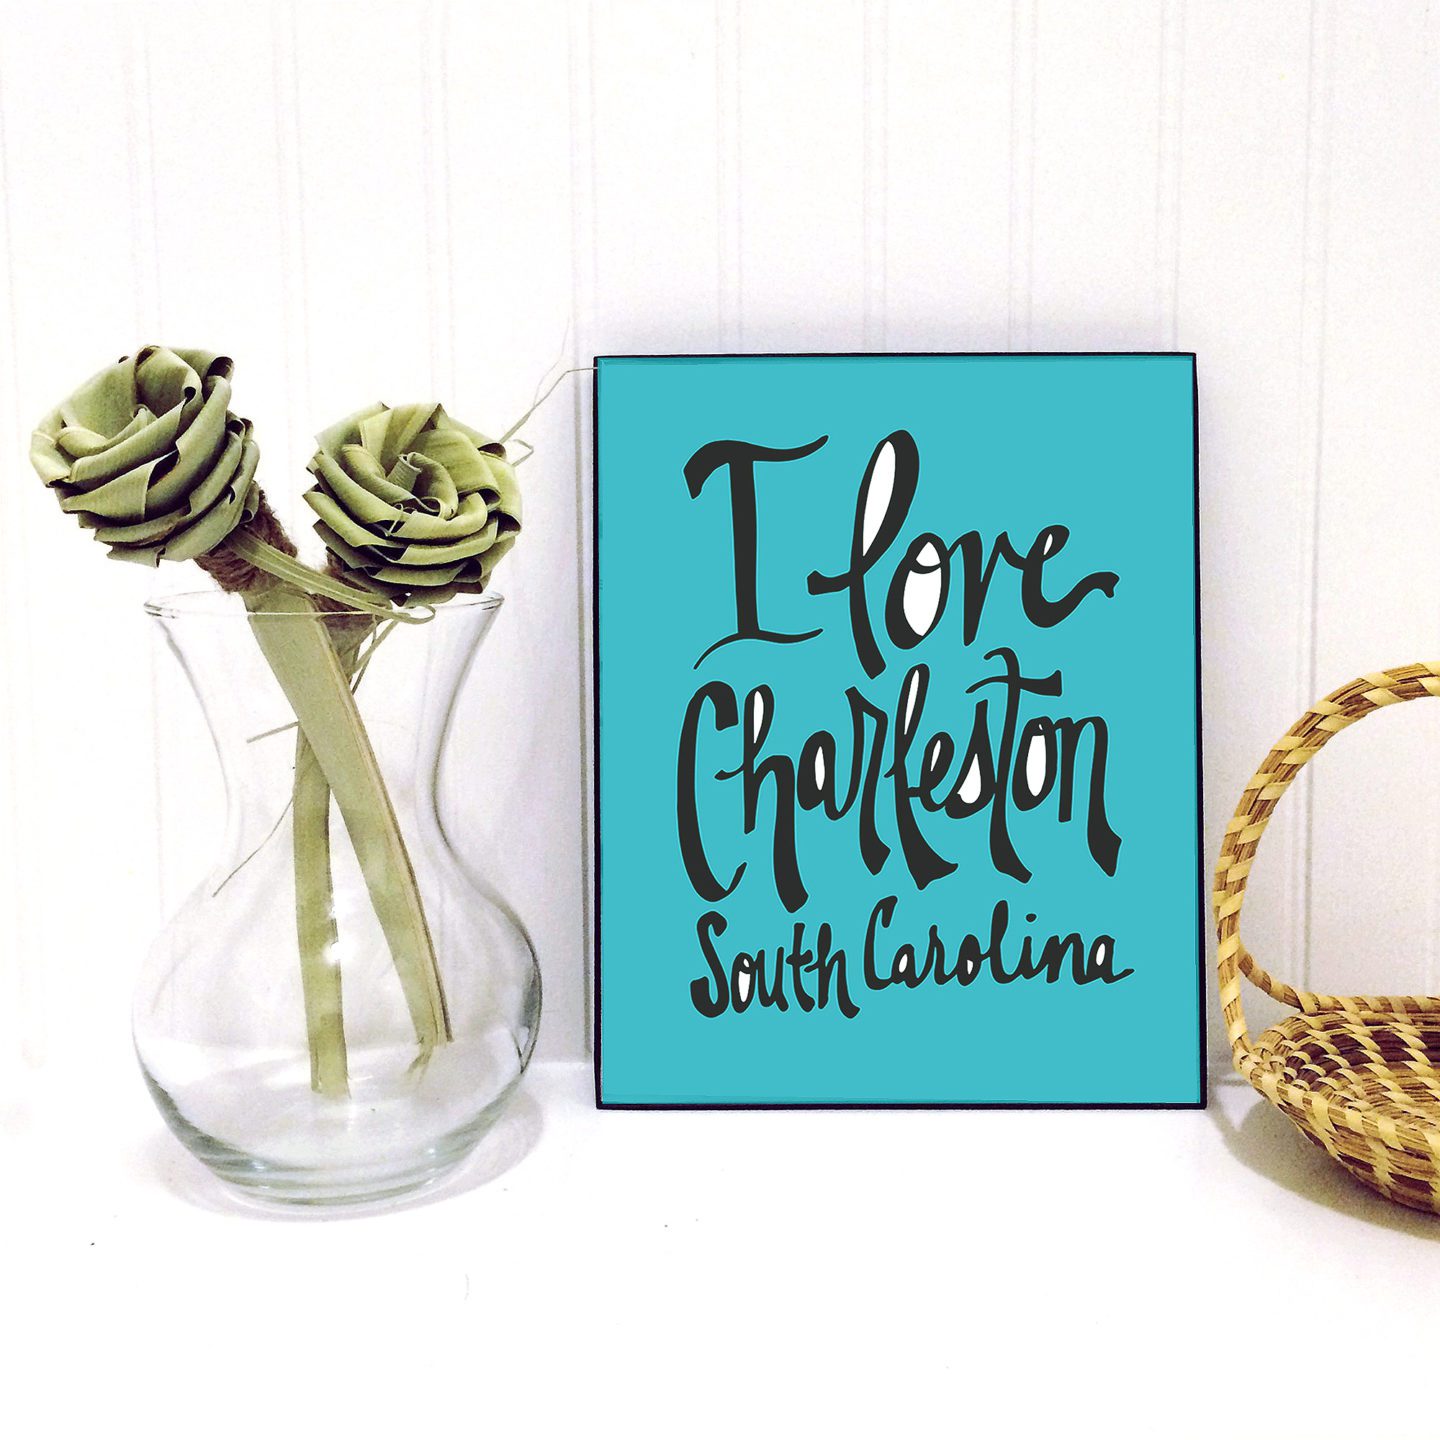 Etsy Home Decor with Southern Inspiration